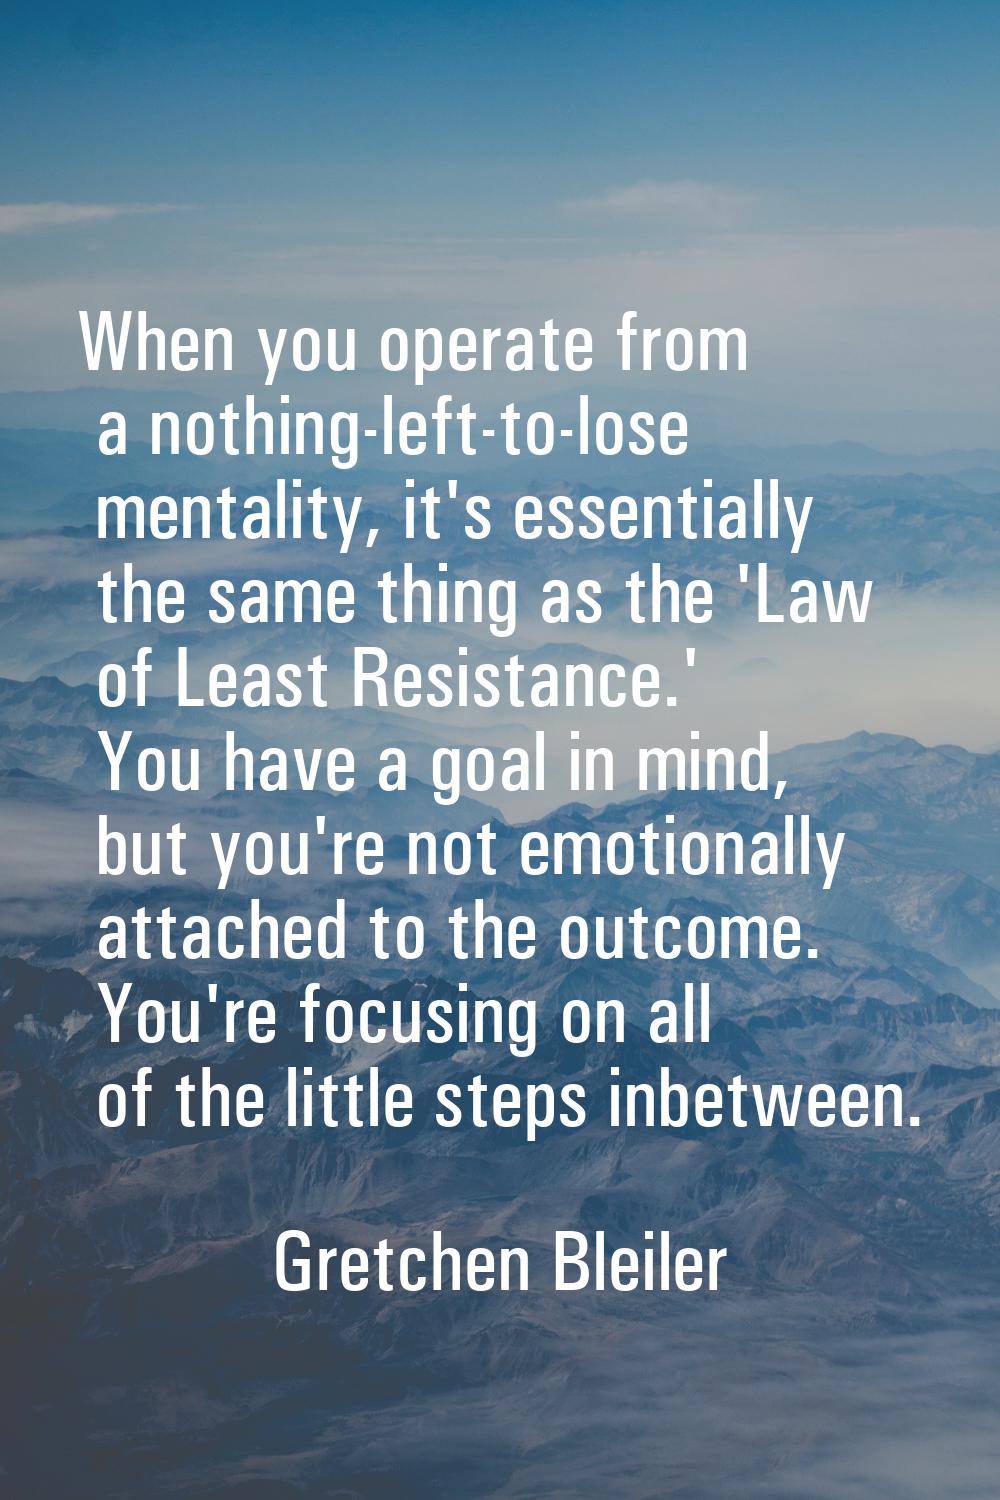 When you operate from a nothing-left-to-lose mentality, it's essentially the same thing as the 'Law